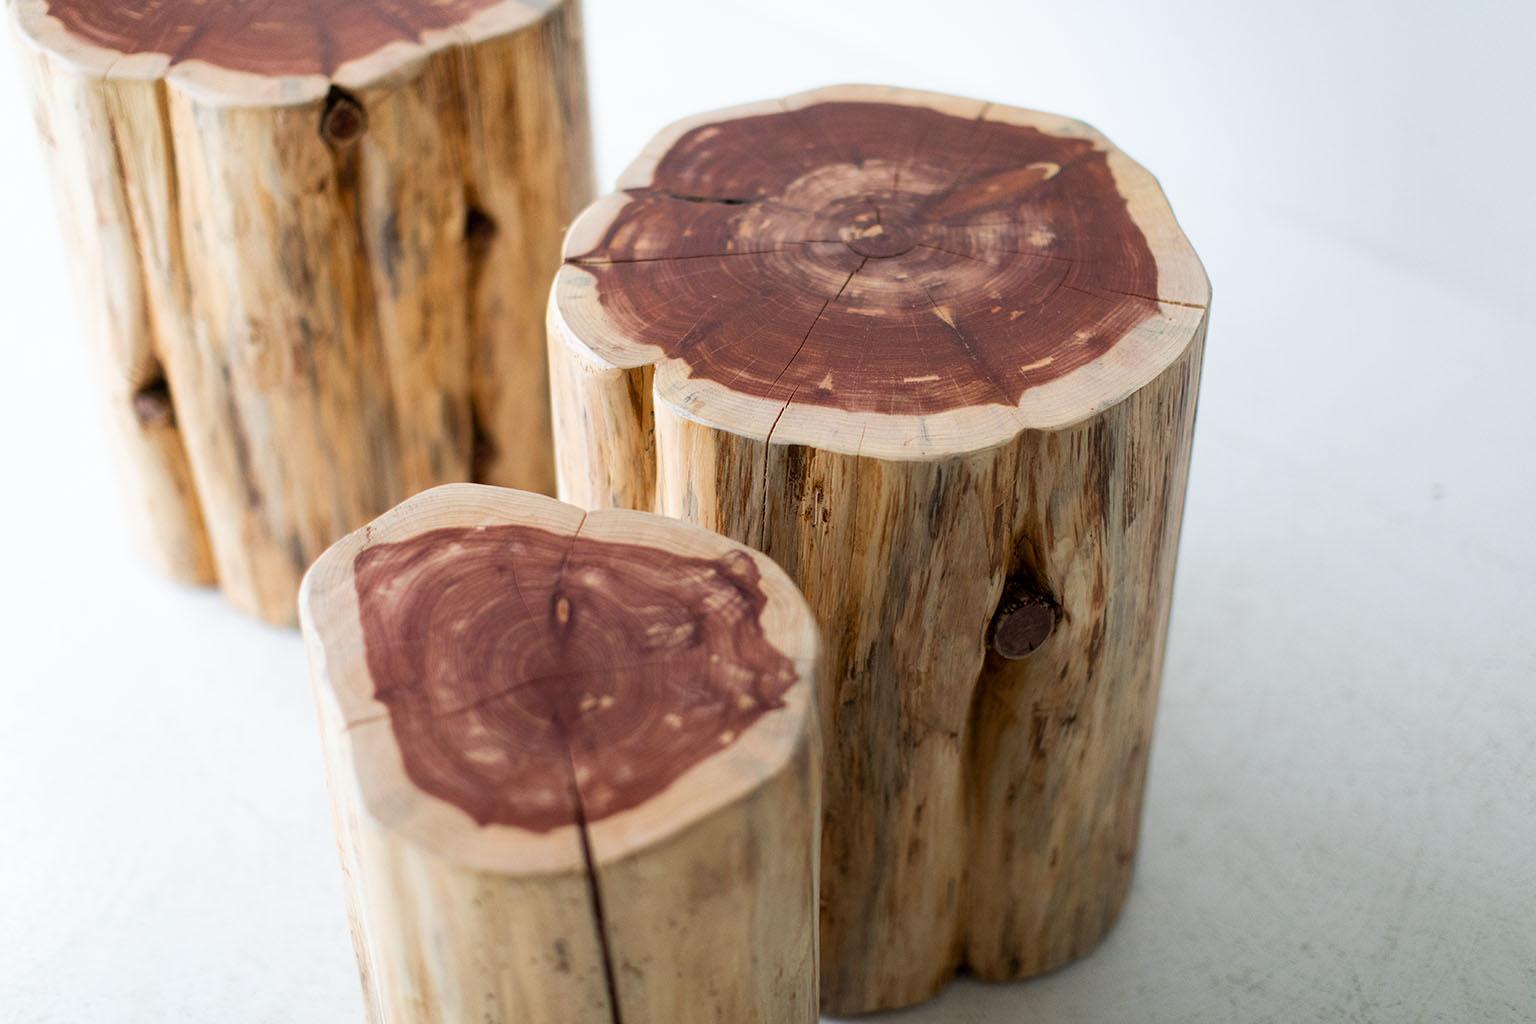 Please scroll down to read IMPORTANT INSTRUCTIONS ABOUT OUR STUMPS before purchase!

Why buy our stumps?

KILN DRIED
Our stumps all go through a drying process in our kiln, sometimes for up to a month. We are meticulous with bringing each and every